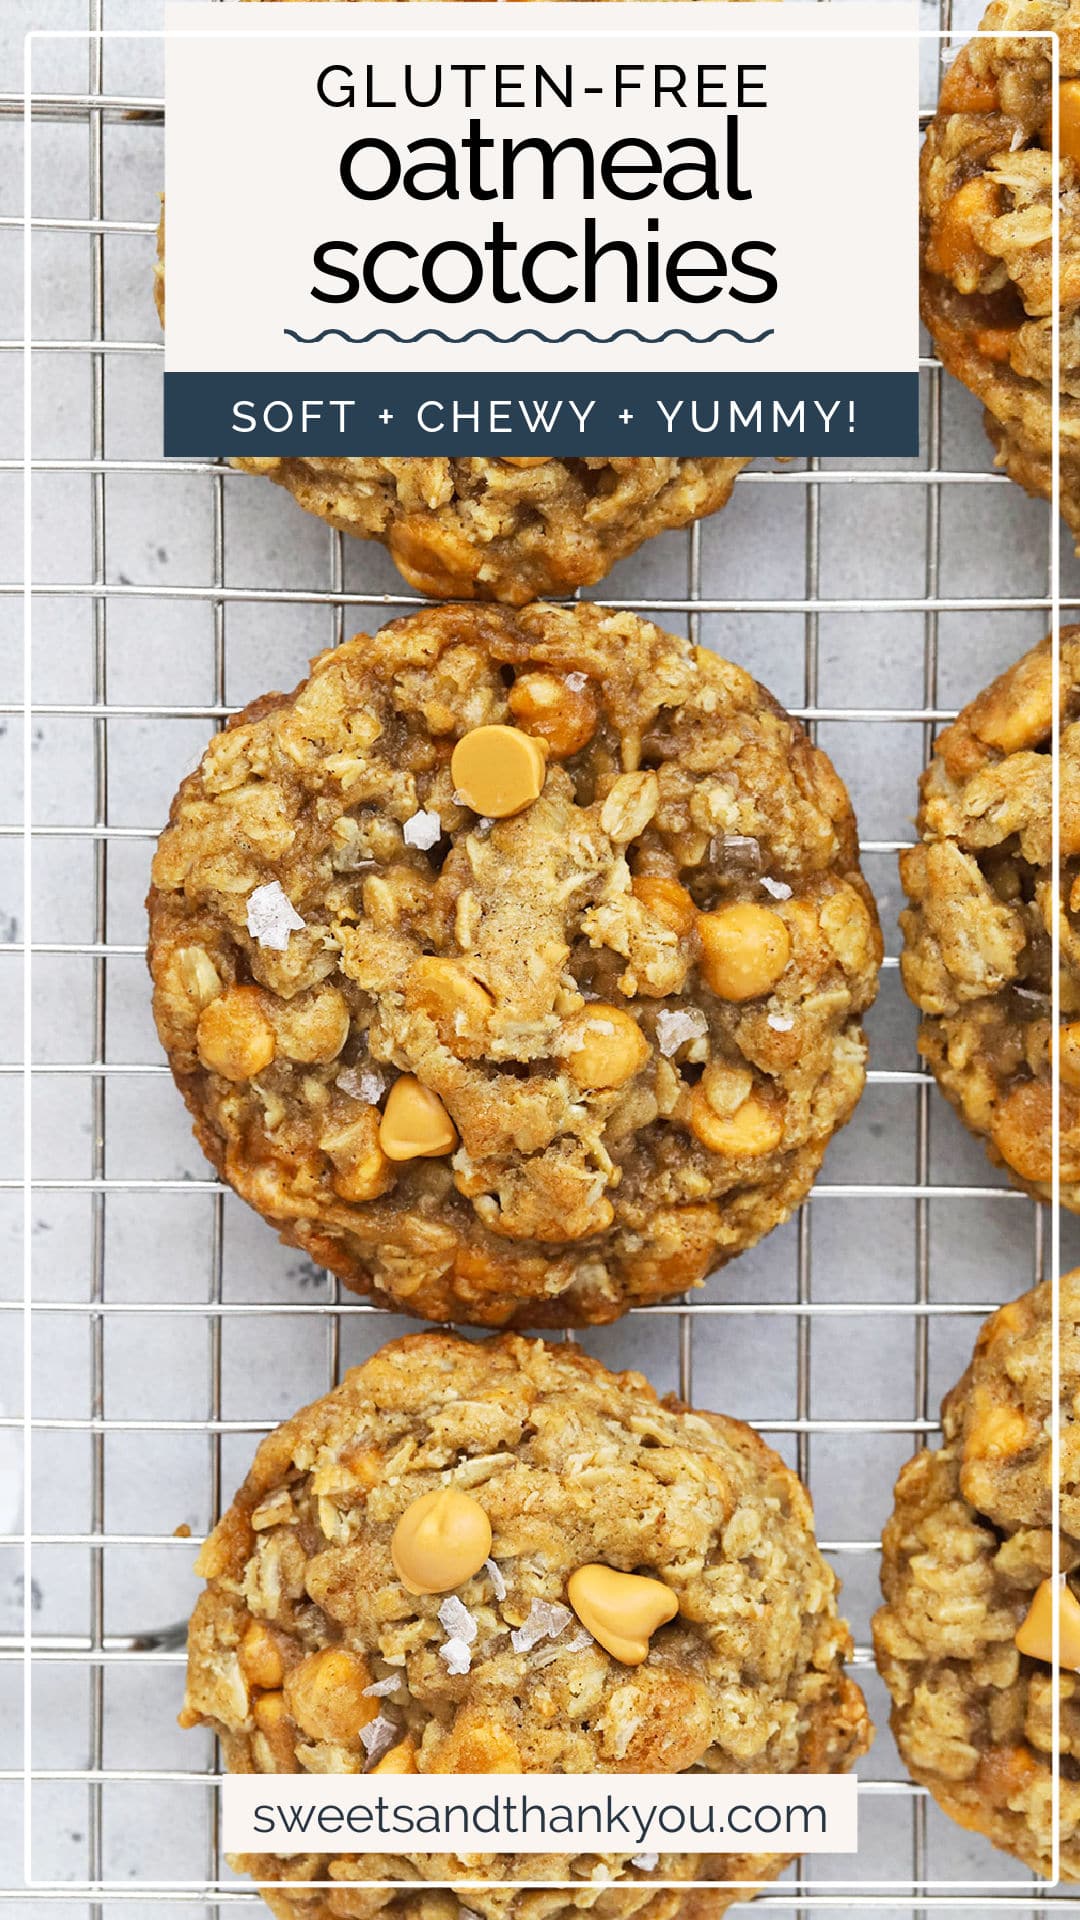 Gluten-Free Oatmeal Butterscotch Cookies - Easy, chewy gluten-free oatmeal scotchies cookies are loaded with flavor & have the best texture! // the best oatmeal scotchies recipe // gluten-free oatmeal cookies recipe // chewy oatmeal cookies // gluten free cookies // butterscotch cookies // gluten free butterscotch cookies // 